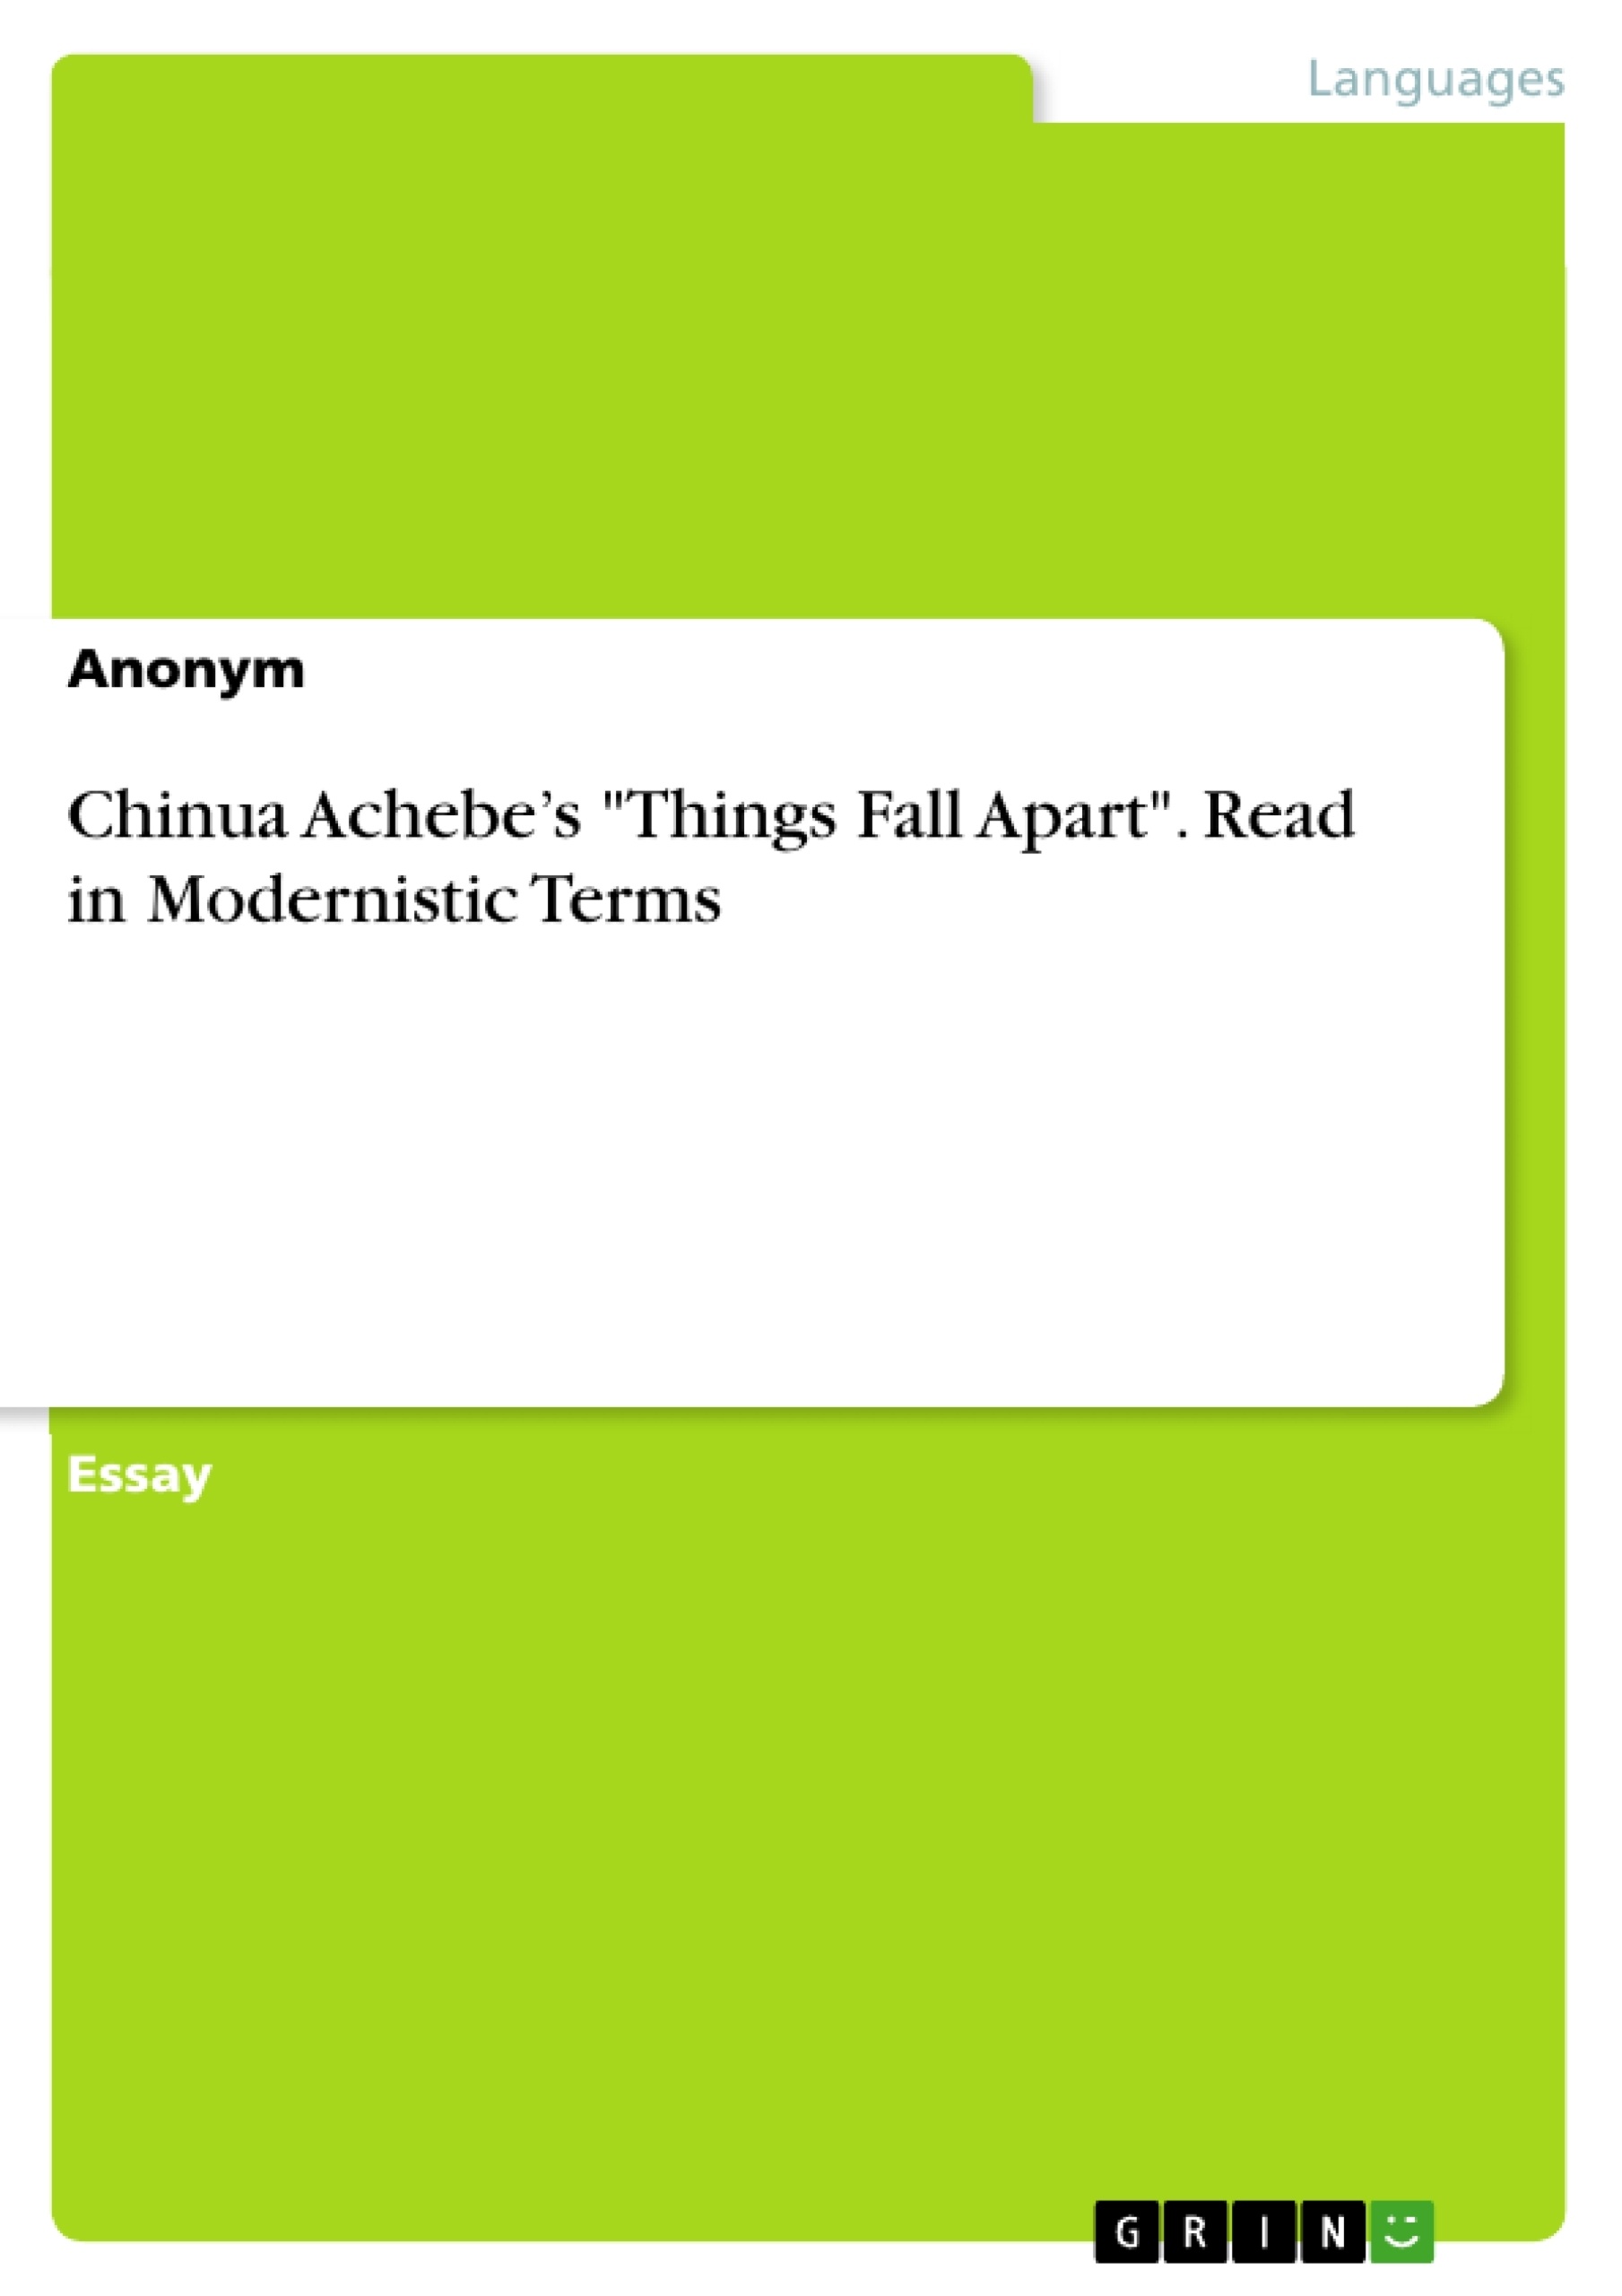 Title: Chinua Achebe’s "Things Fall Apart". Read in Modernistic Terms